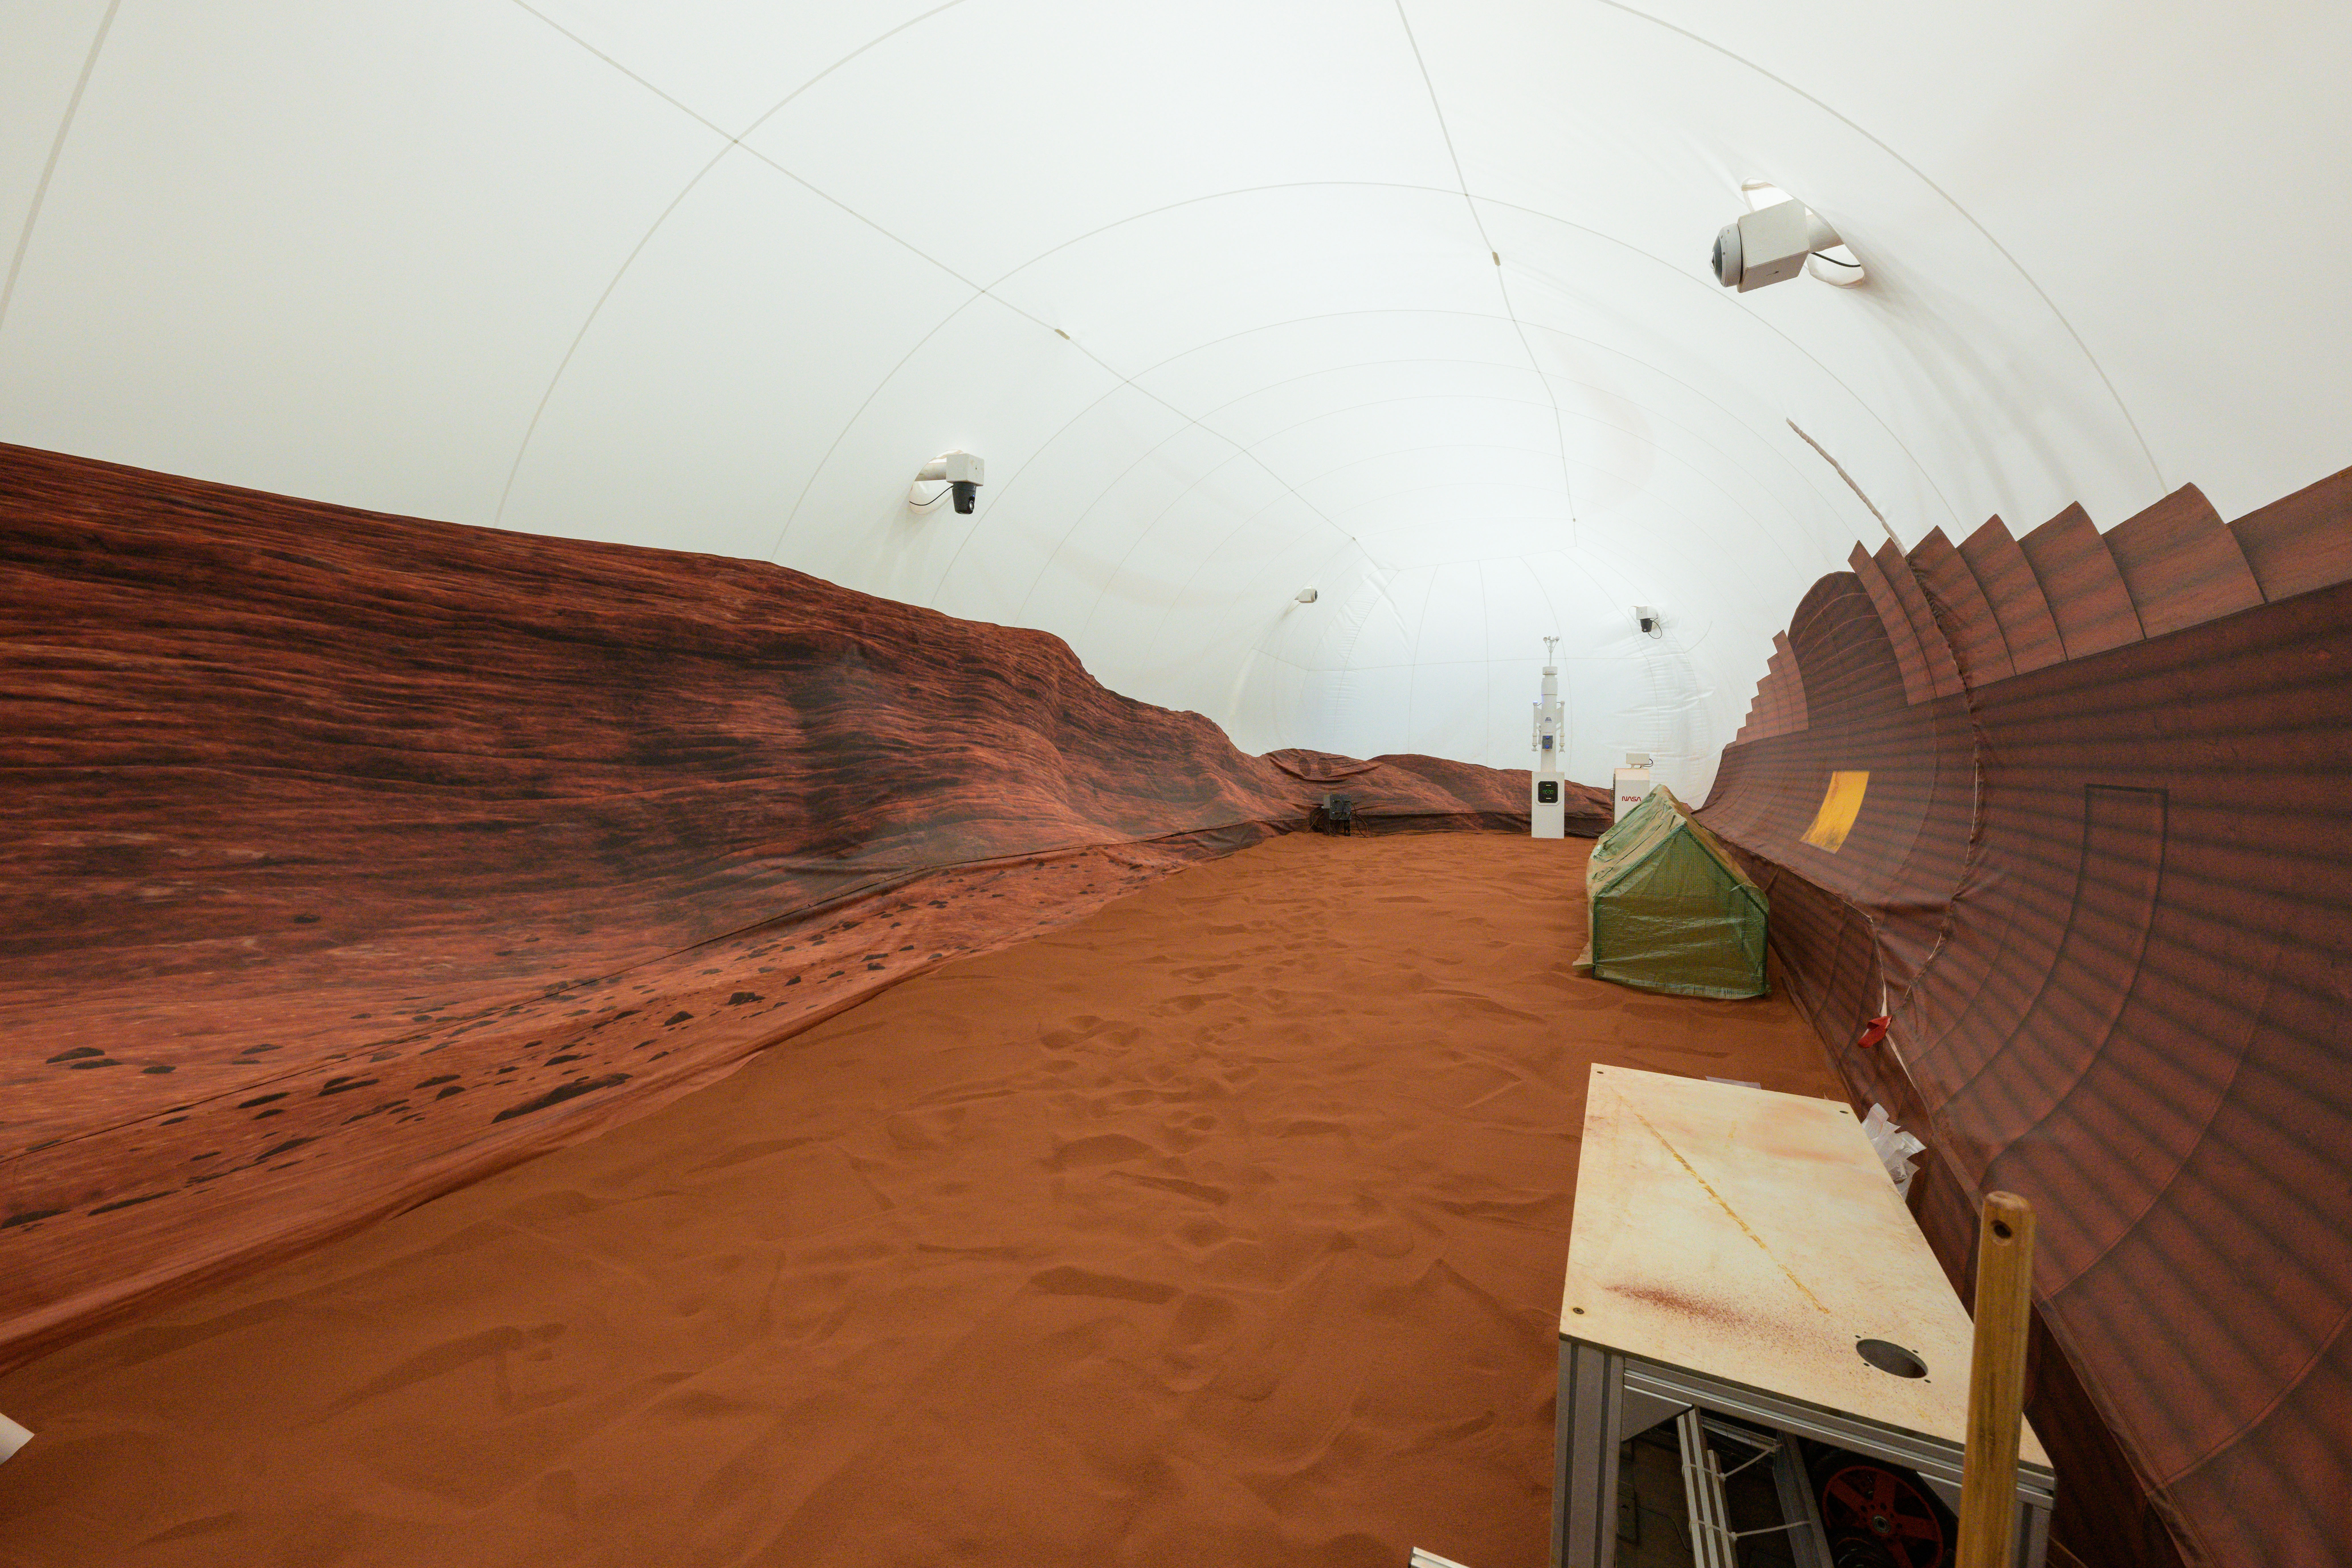 The 1,200 square foot sandbox located in the CHAPEA habitat at NASA's Johnson Space Center.